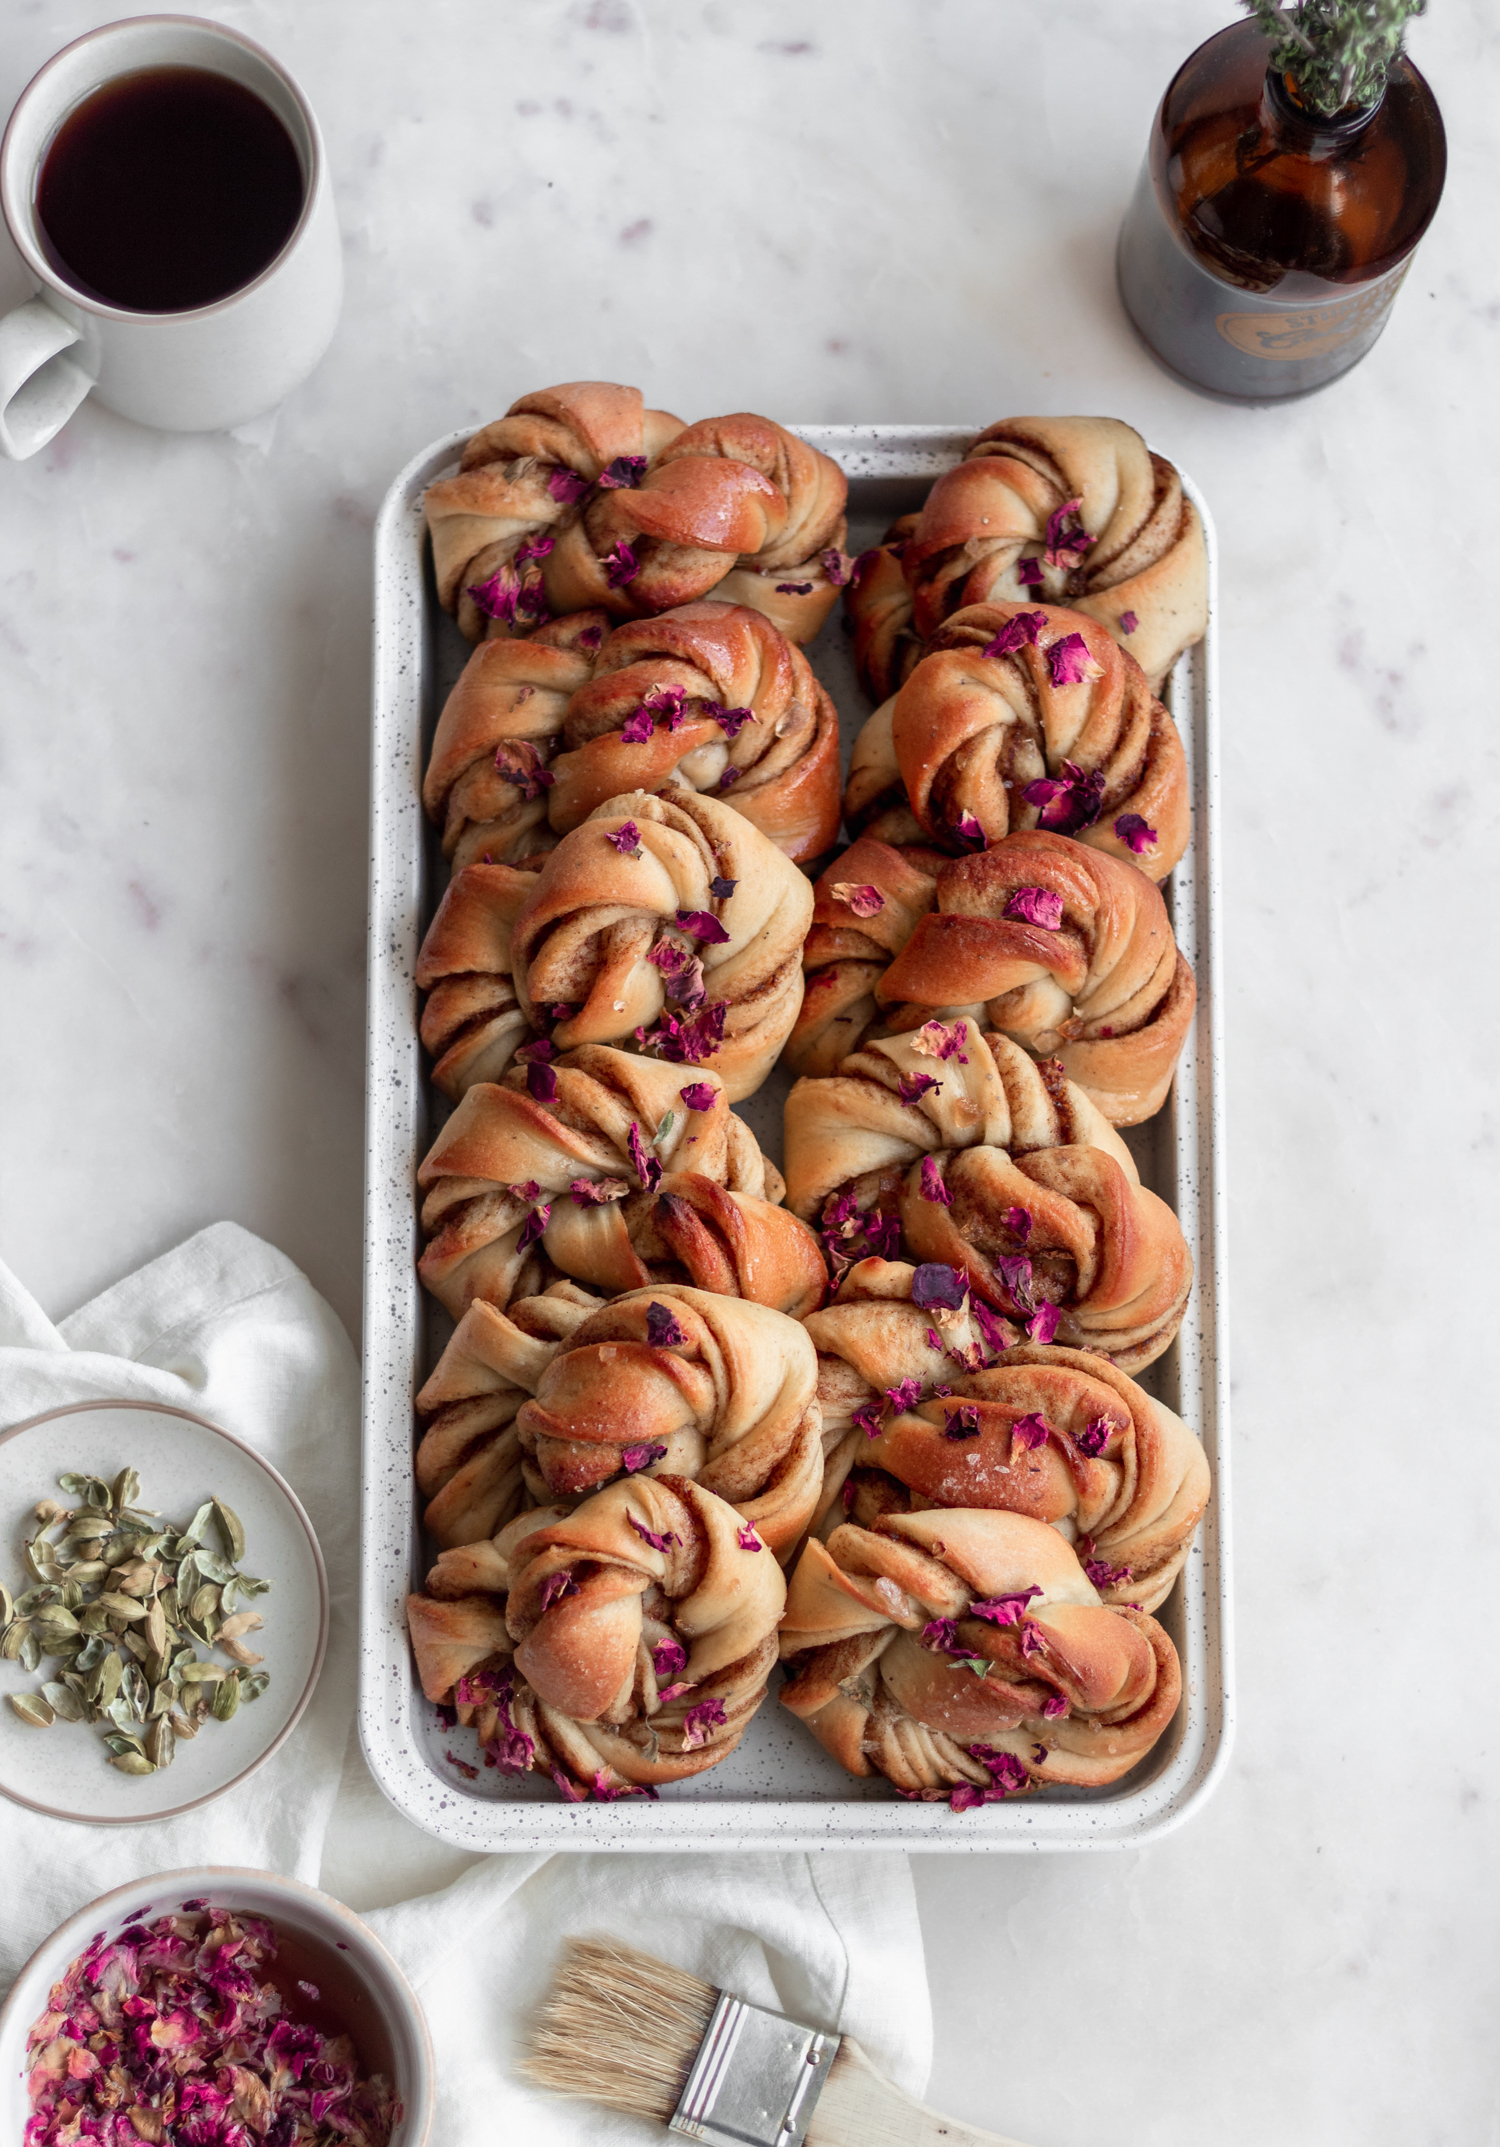 An overhead image of a white baking dish with Swedish cinnamon rolls on a marble counter next to a white linen, cup of coffee, and white plate of cardamom pods.